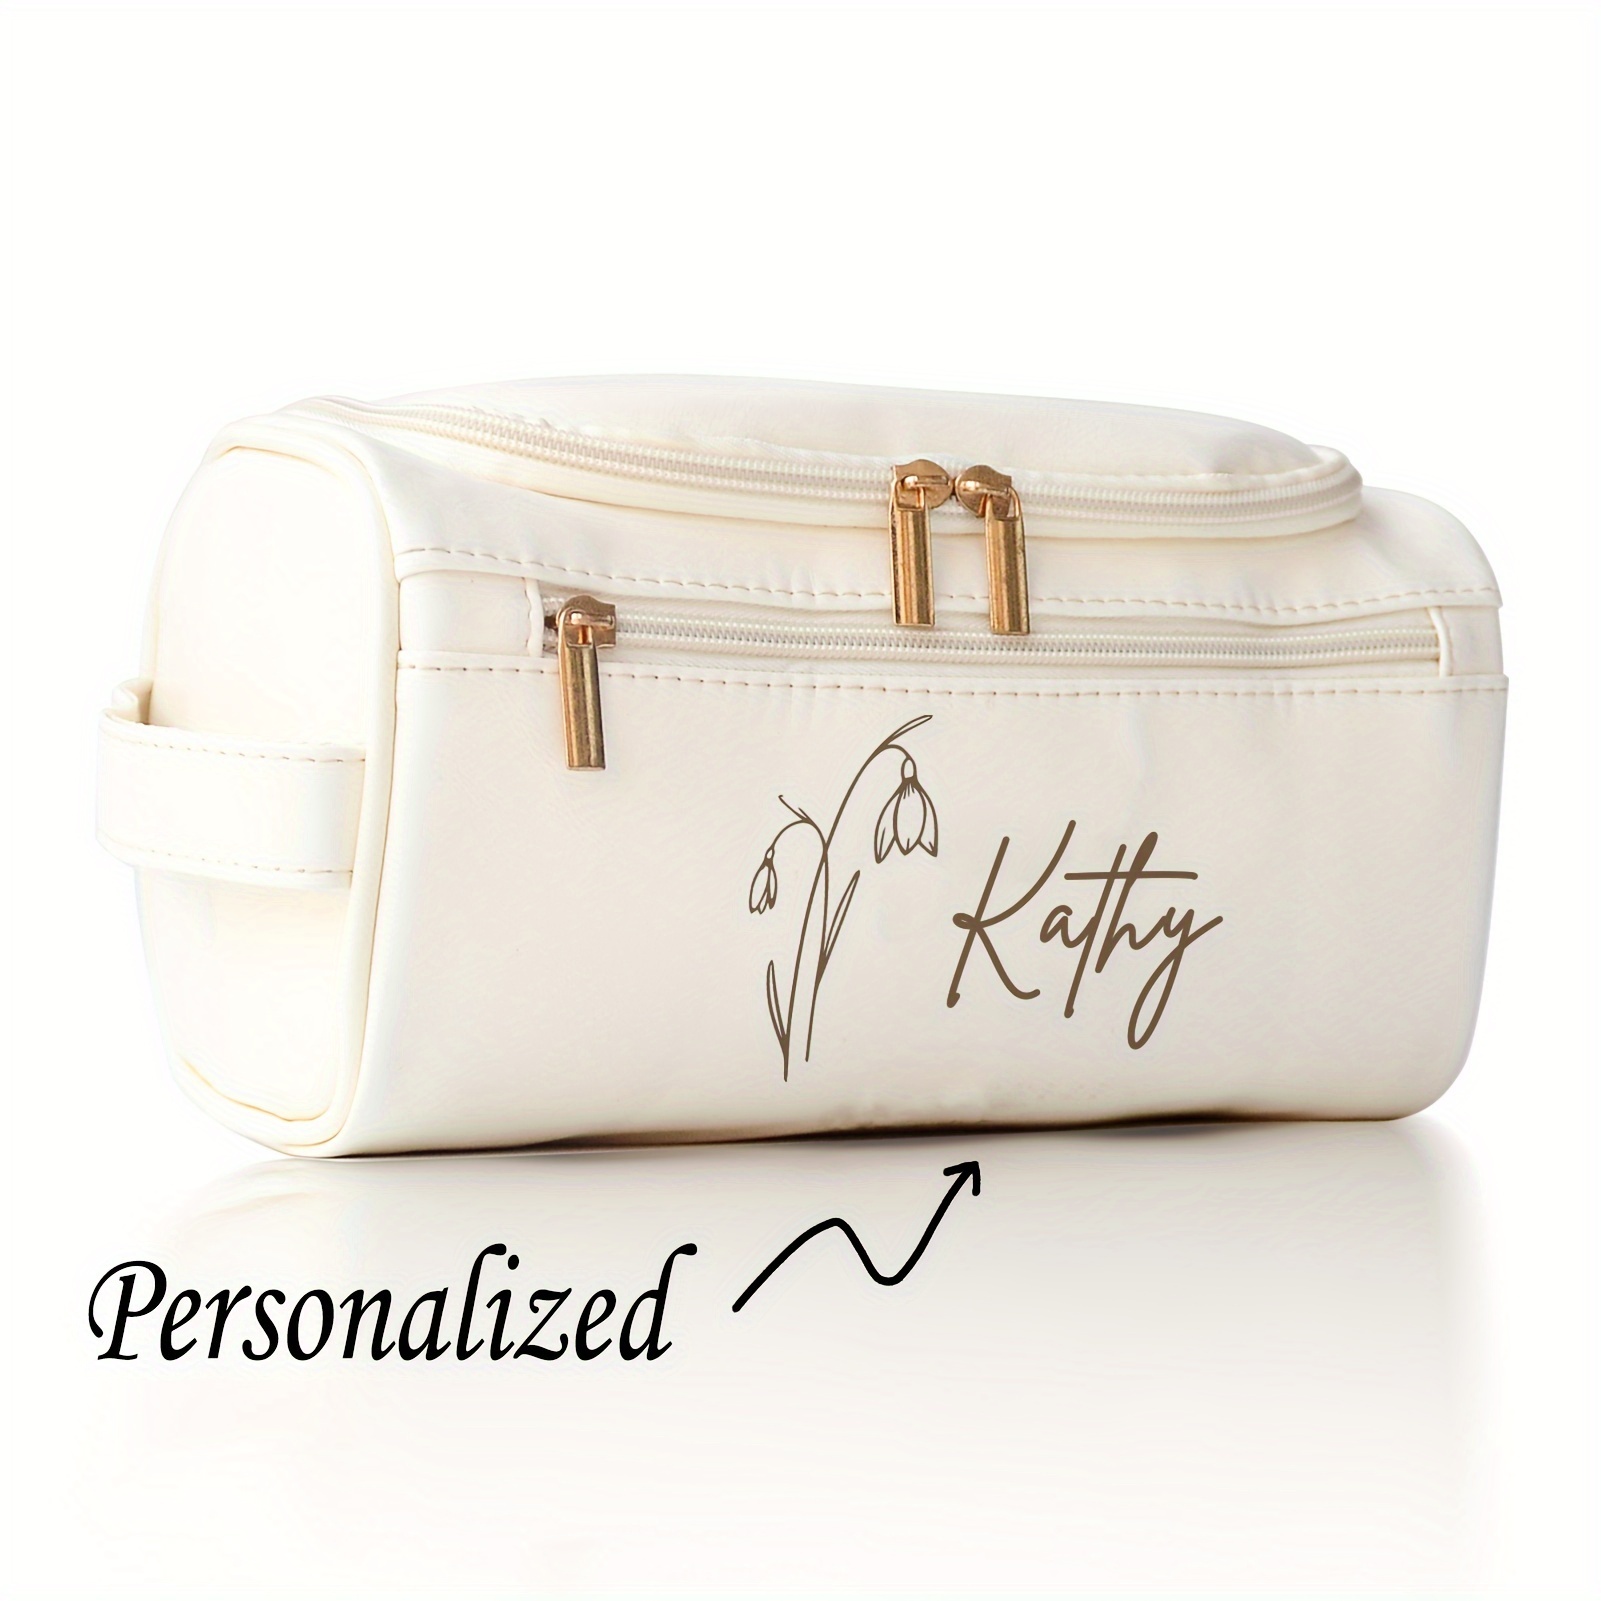 

Personalized Travel Makeup Bag, Monogrammed Cosmetic Bags For Women, Customized Name Initial Toiletry Bag Makeup Organizer, Gift For Mom, Wife, Grandma, Mother's Day, Anniversary